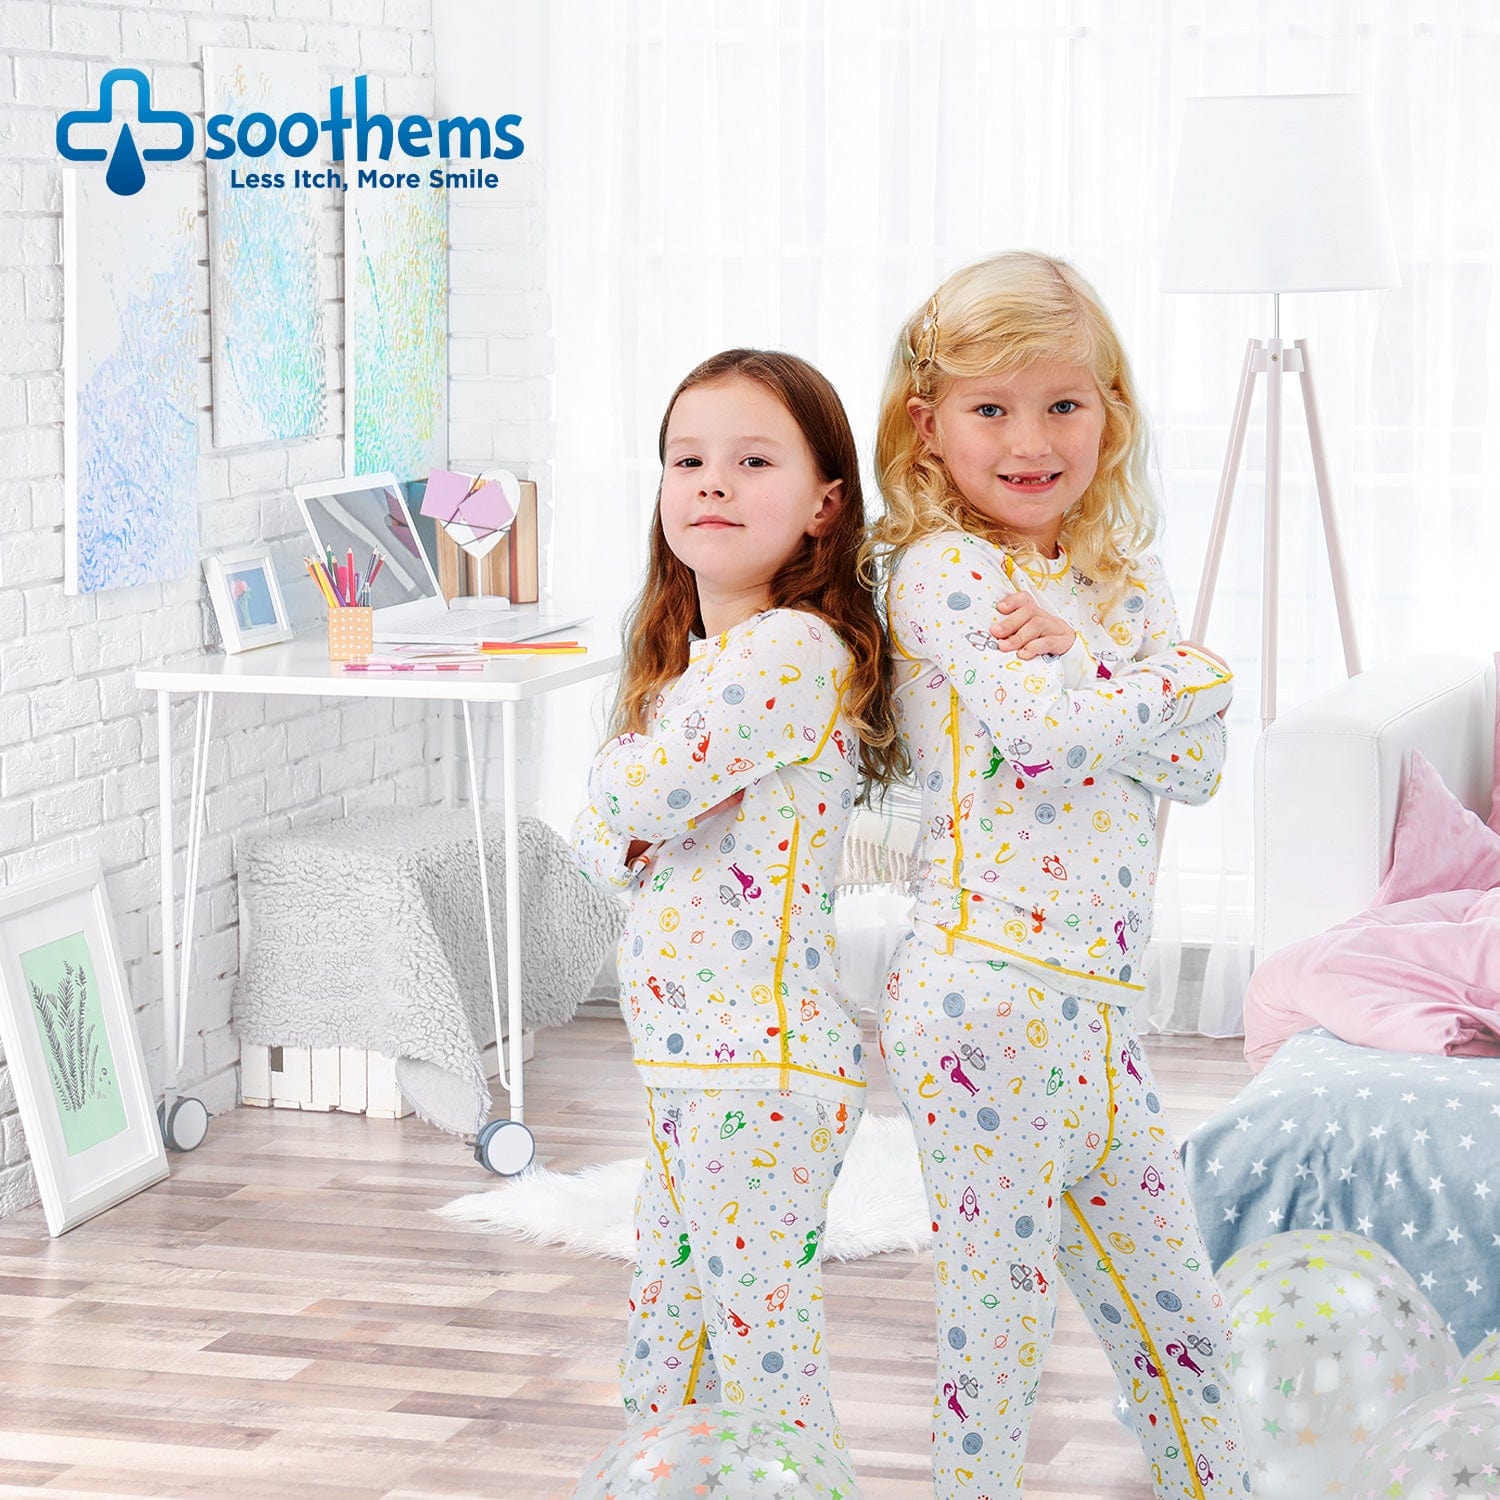 Soothems Eczema Pajamas Kids Set for Wet Wrap Therapy and Itch Relief